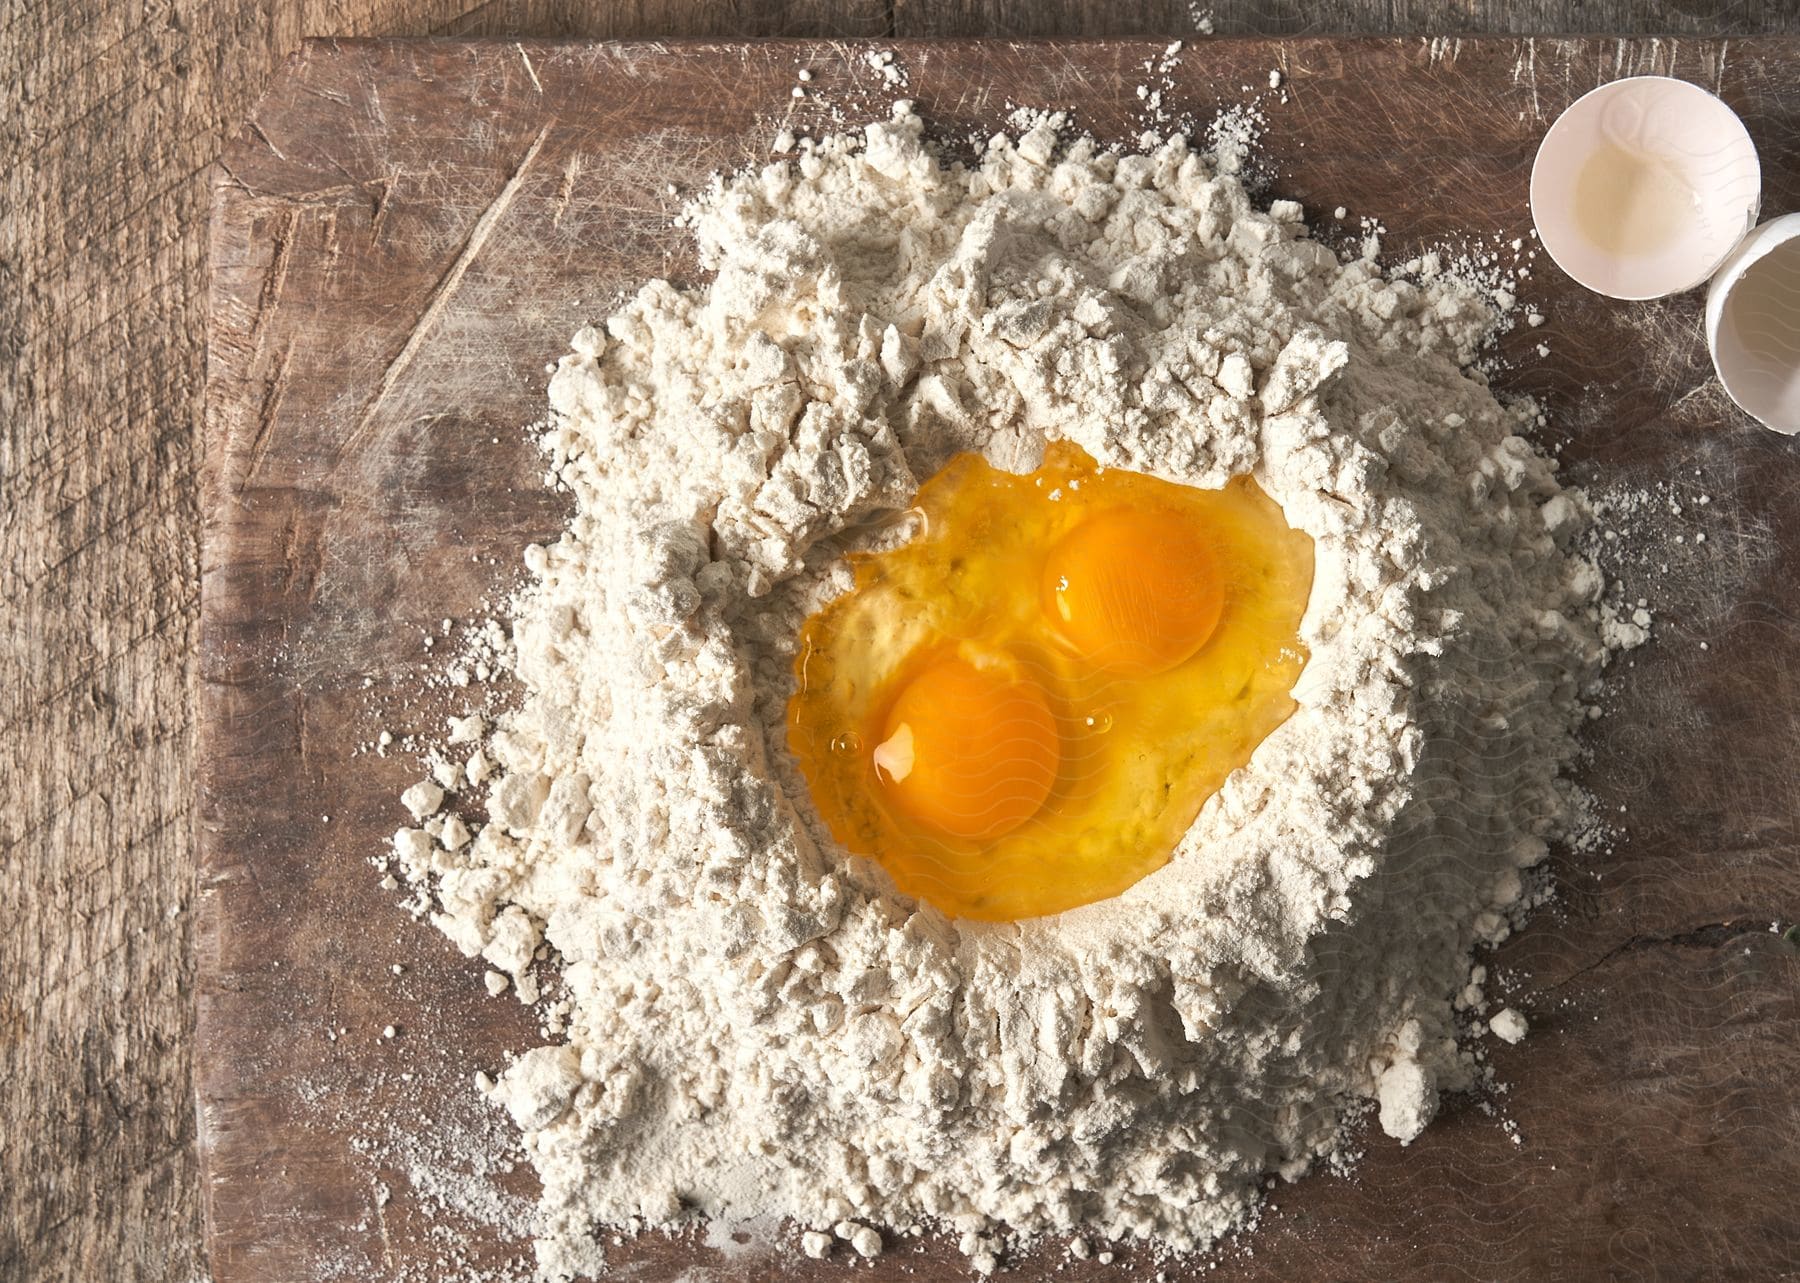 Two cracked eggs on a flour pile on a wooden surface